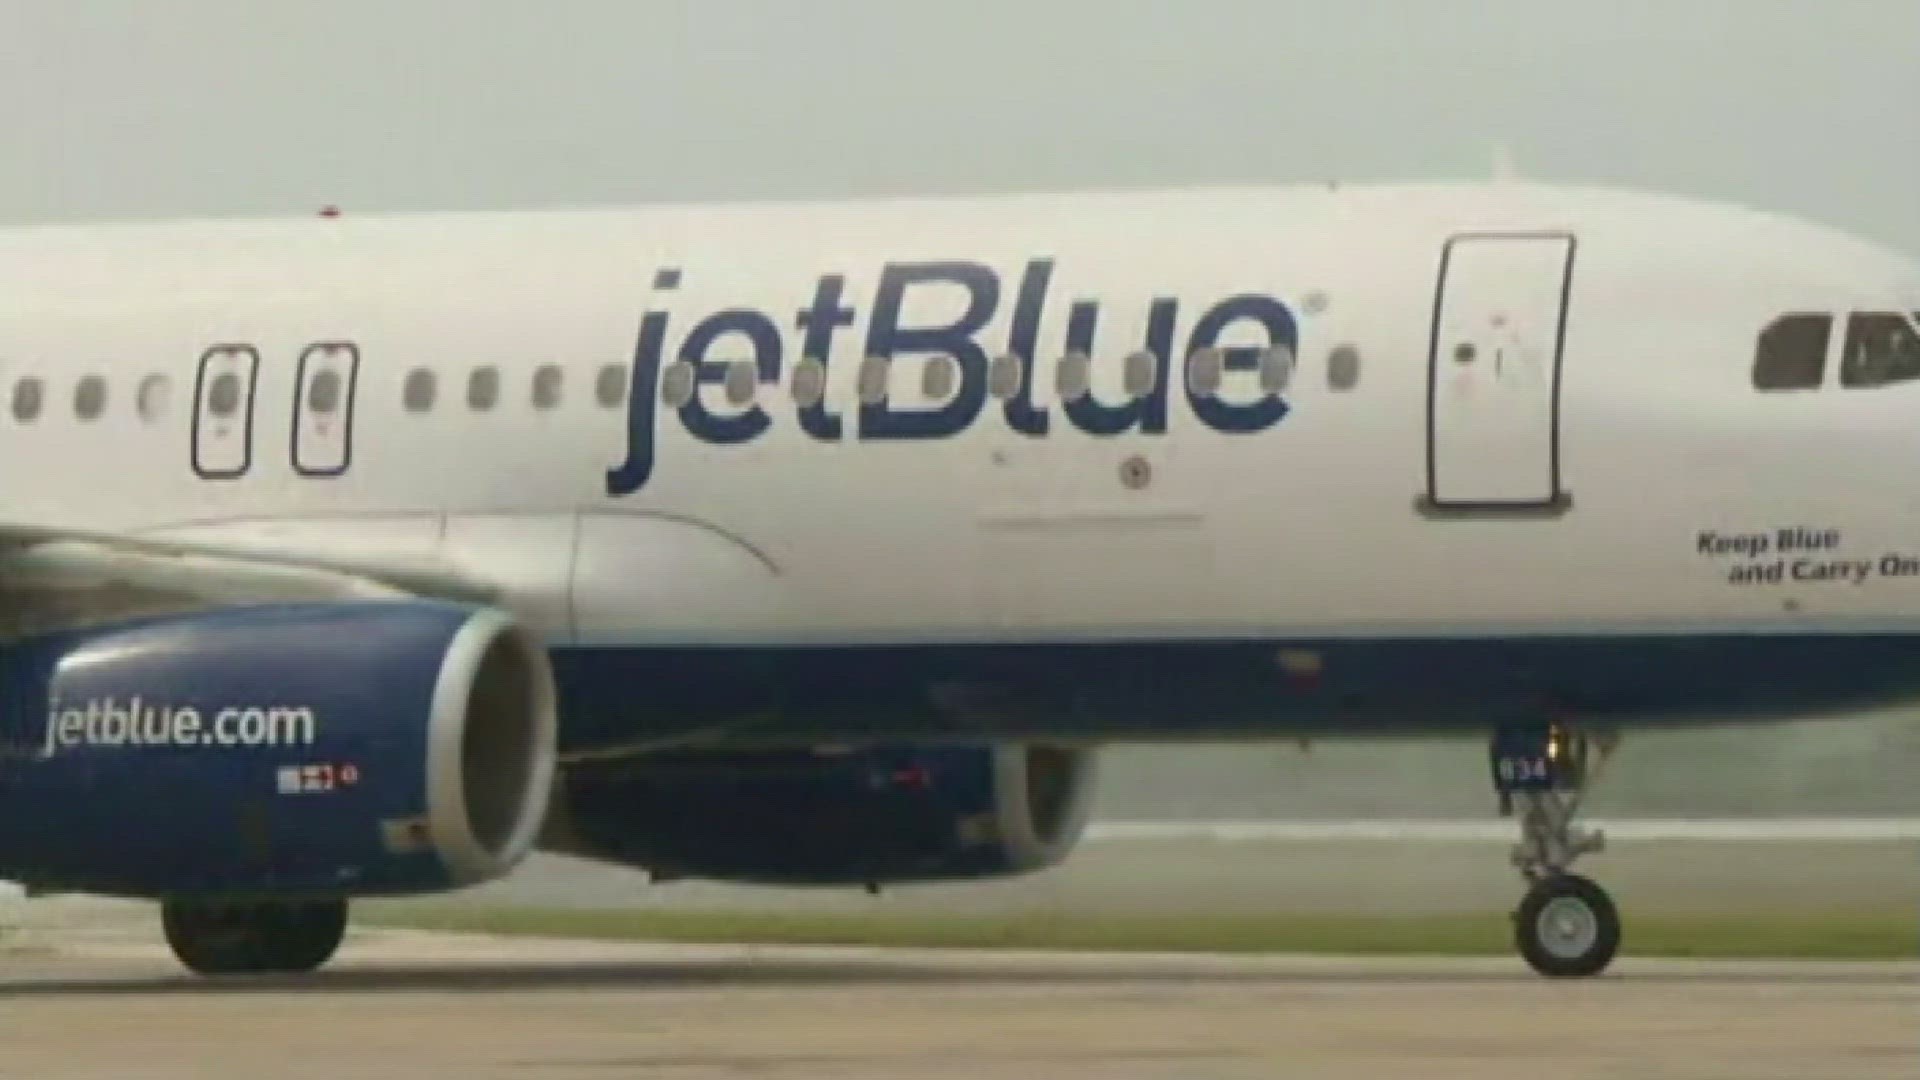 An economist predicted that consumers would spend more than $700 million a year extra if American and JetBlue stopped competing with each other in the Northeast.